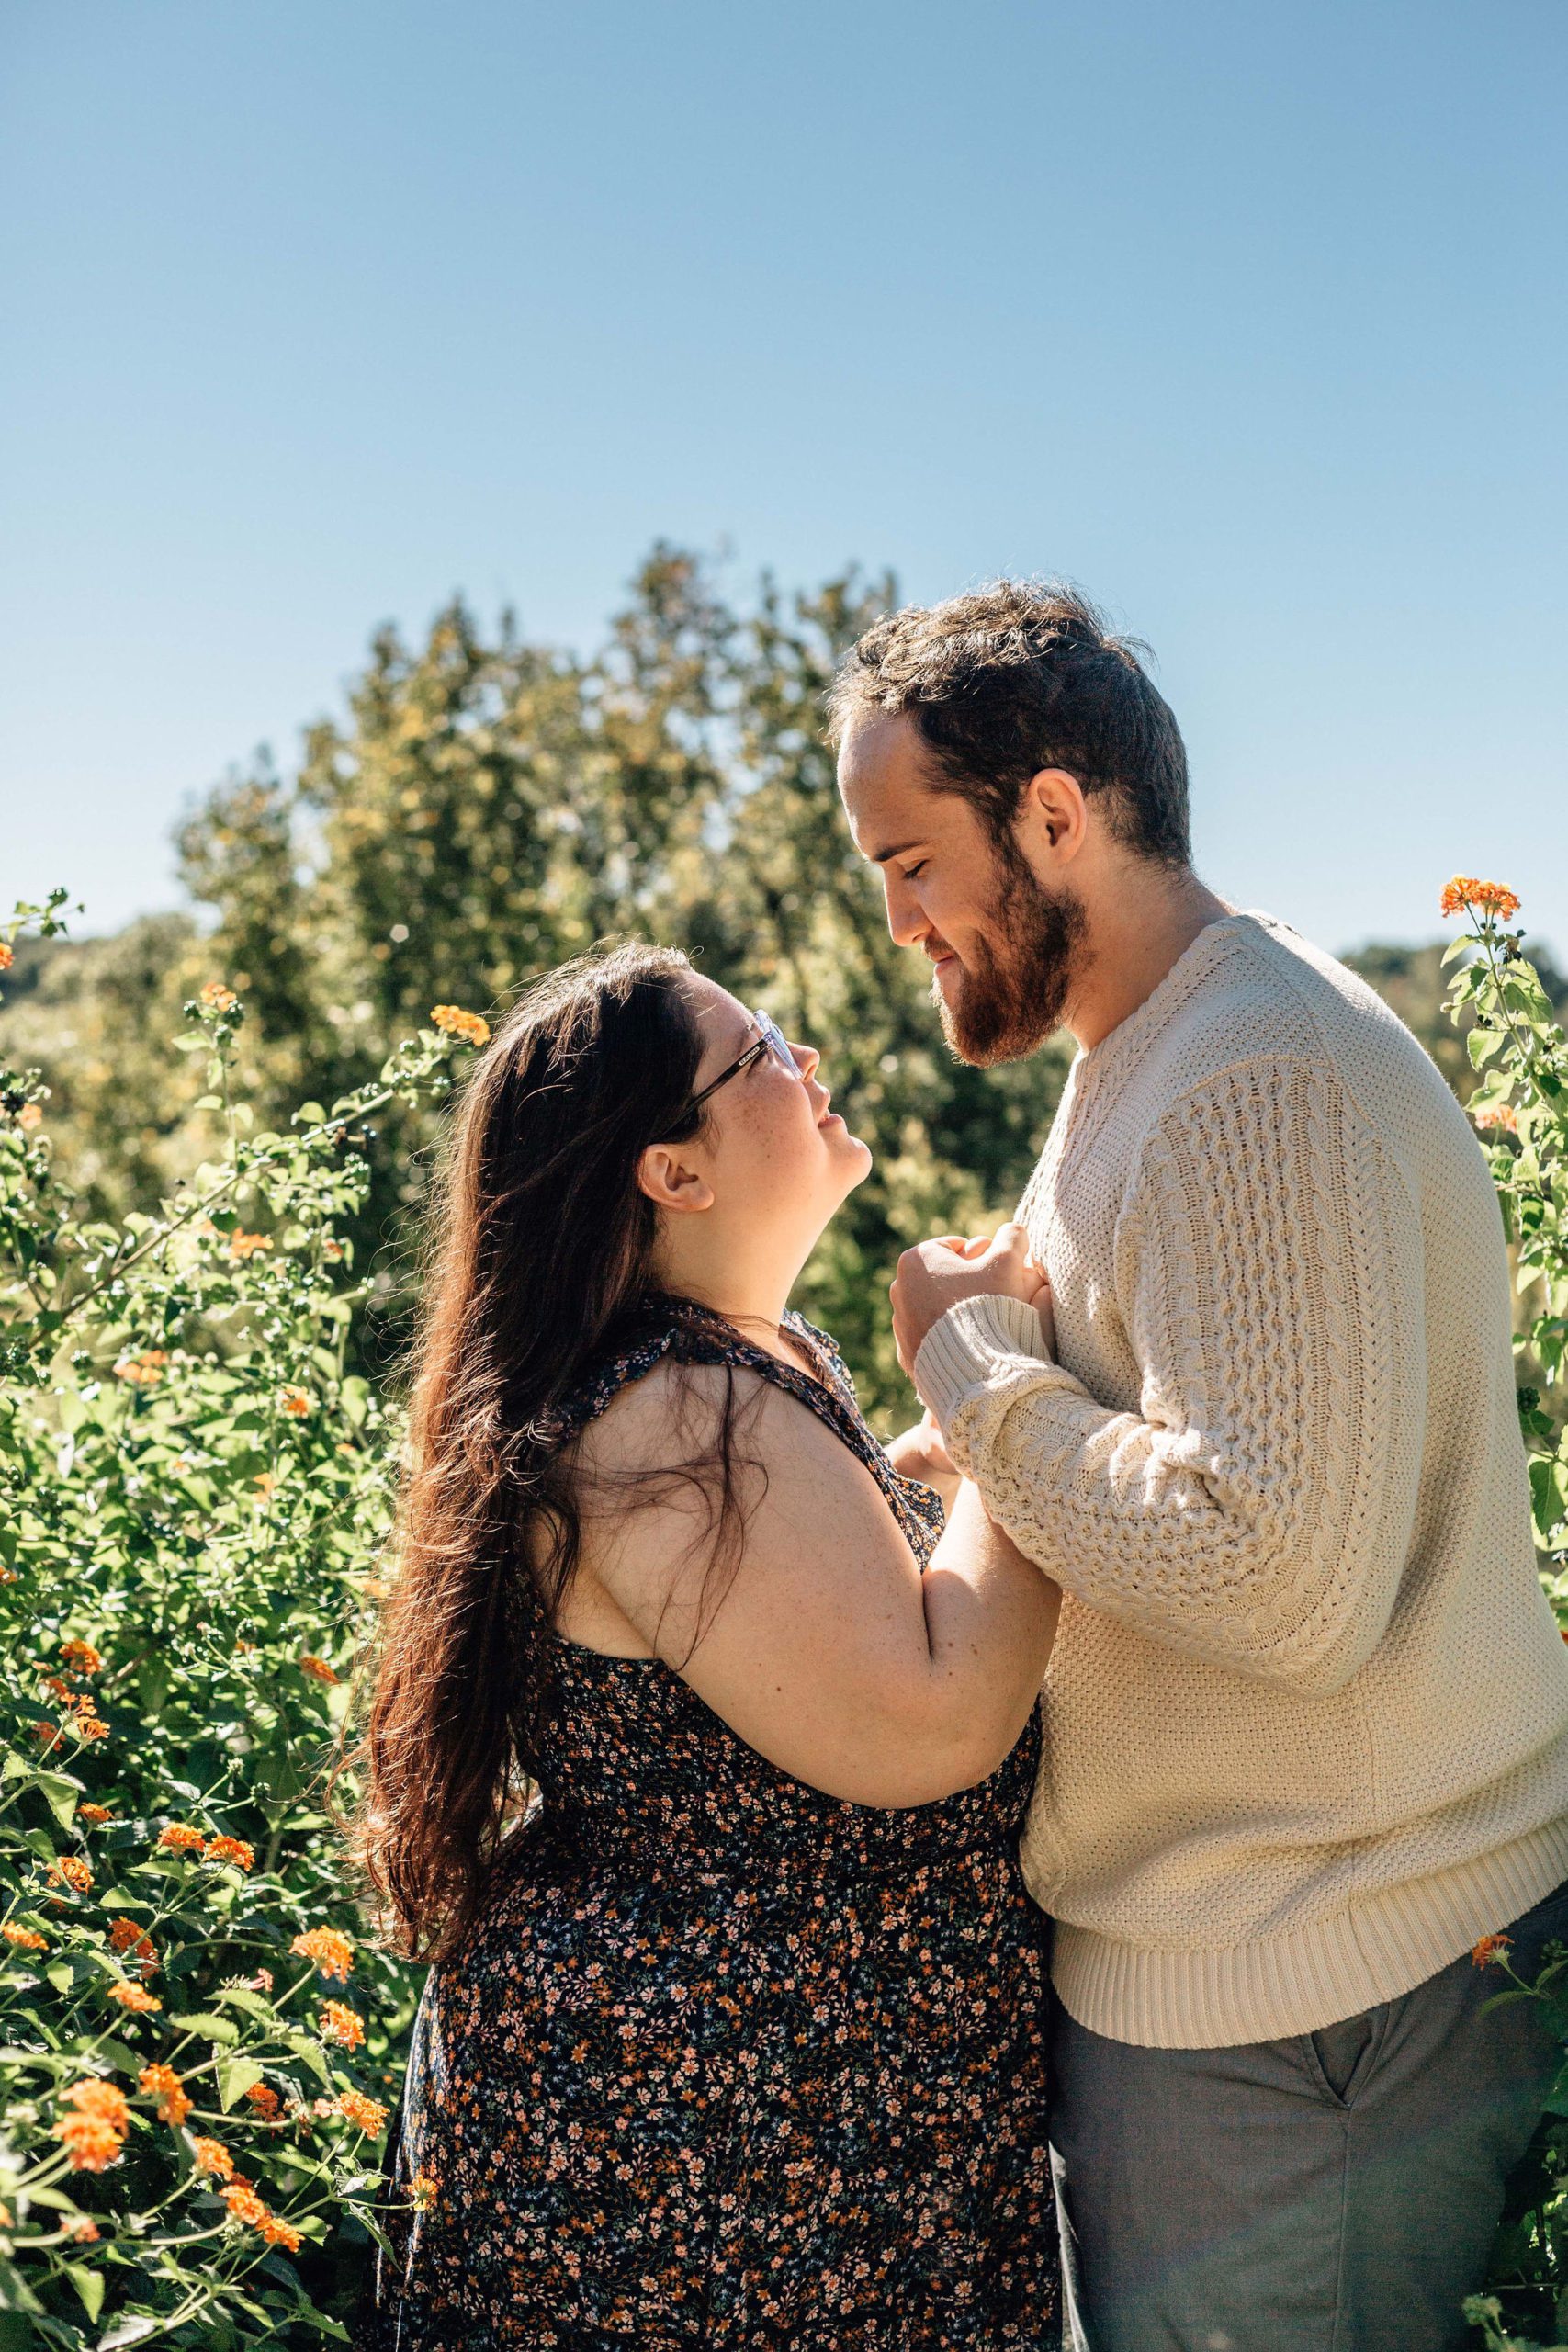 Hampton Roads natural engagement photo pose ideas with man and woman in a garden of flowers holding hands and facing each other